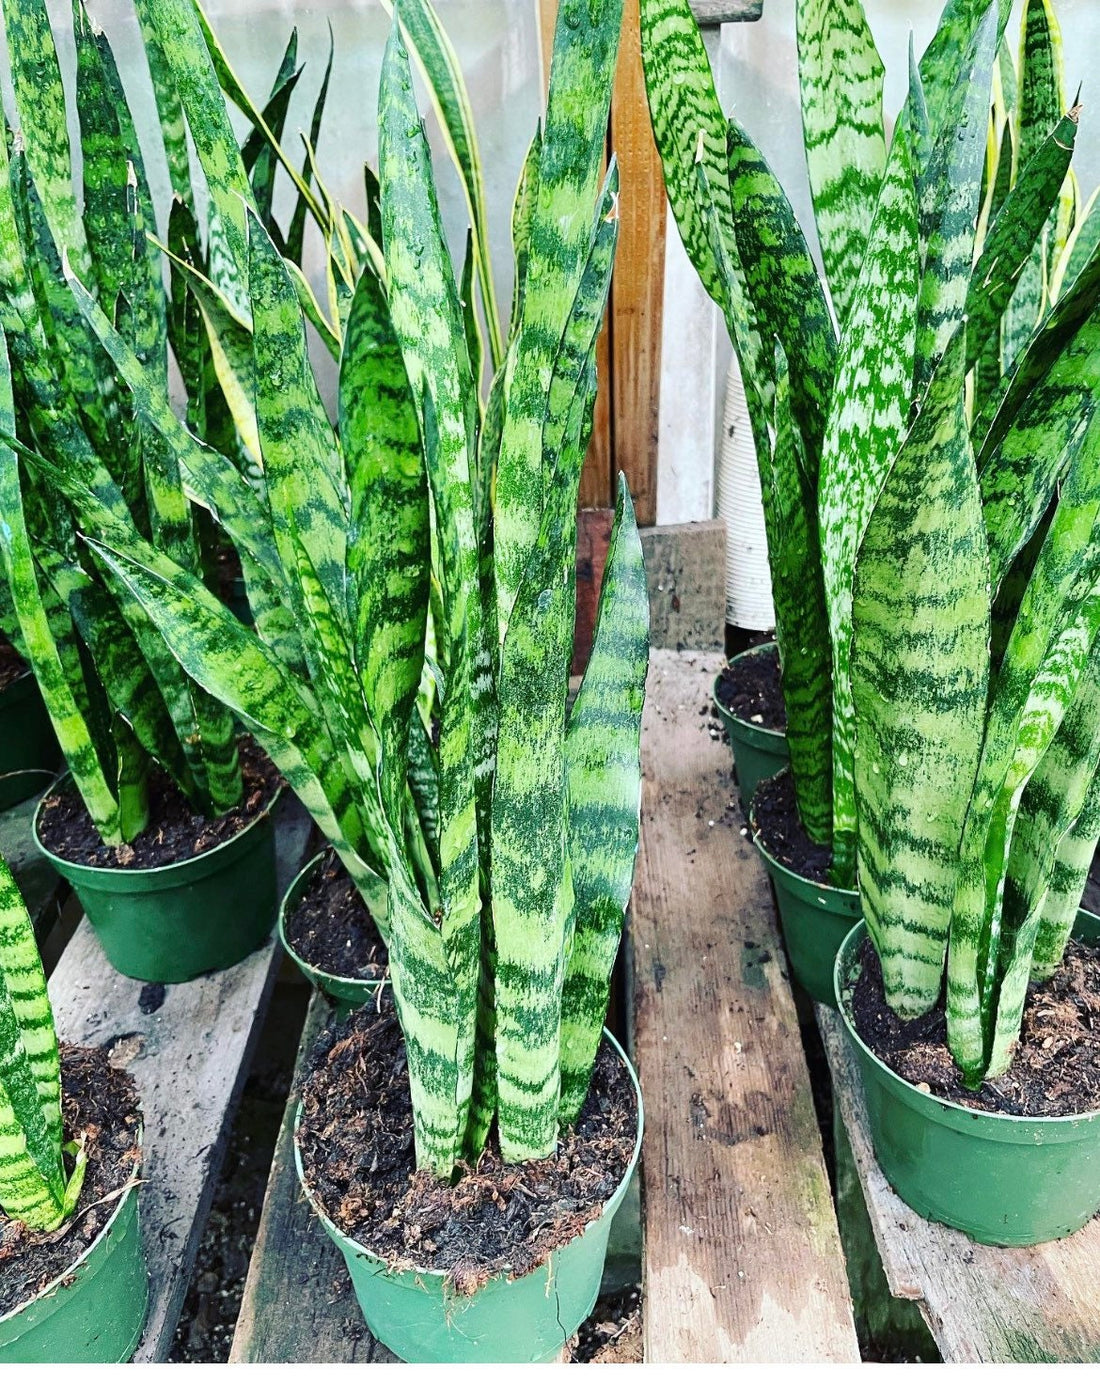 XXXL available- multiple options:   1ft to 3ft tall  -Sansevieria trifasciata Green - Bowstring Hemp, Snake Plant, Mother-In-Law&